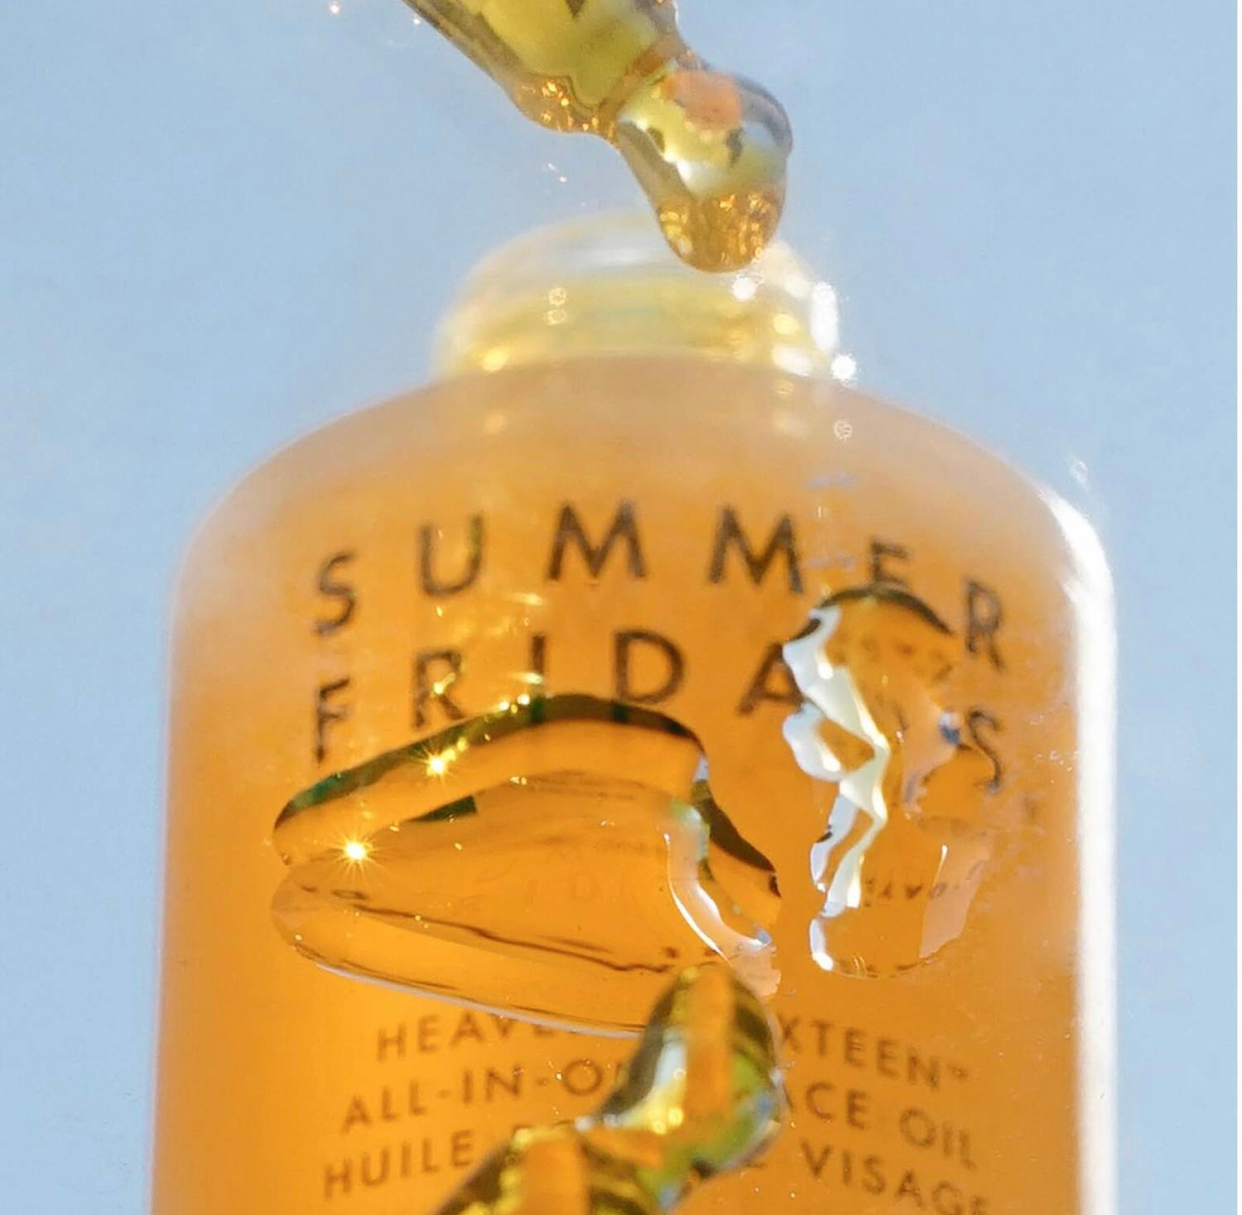 SUMMER FRIDAYS HEAVENLY SIXTEEN ALL-IN-ONE FACE OIL